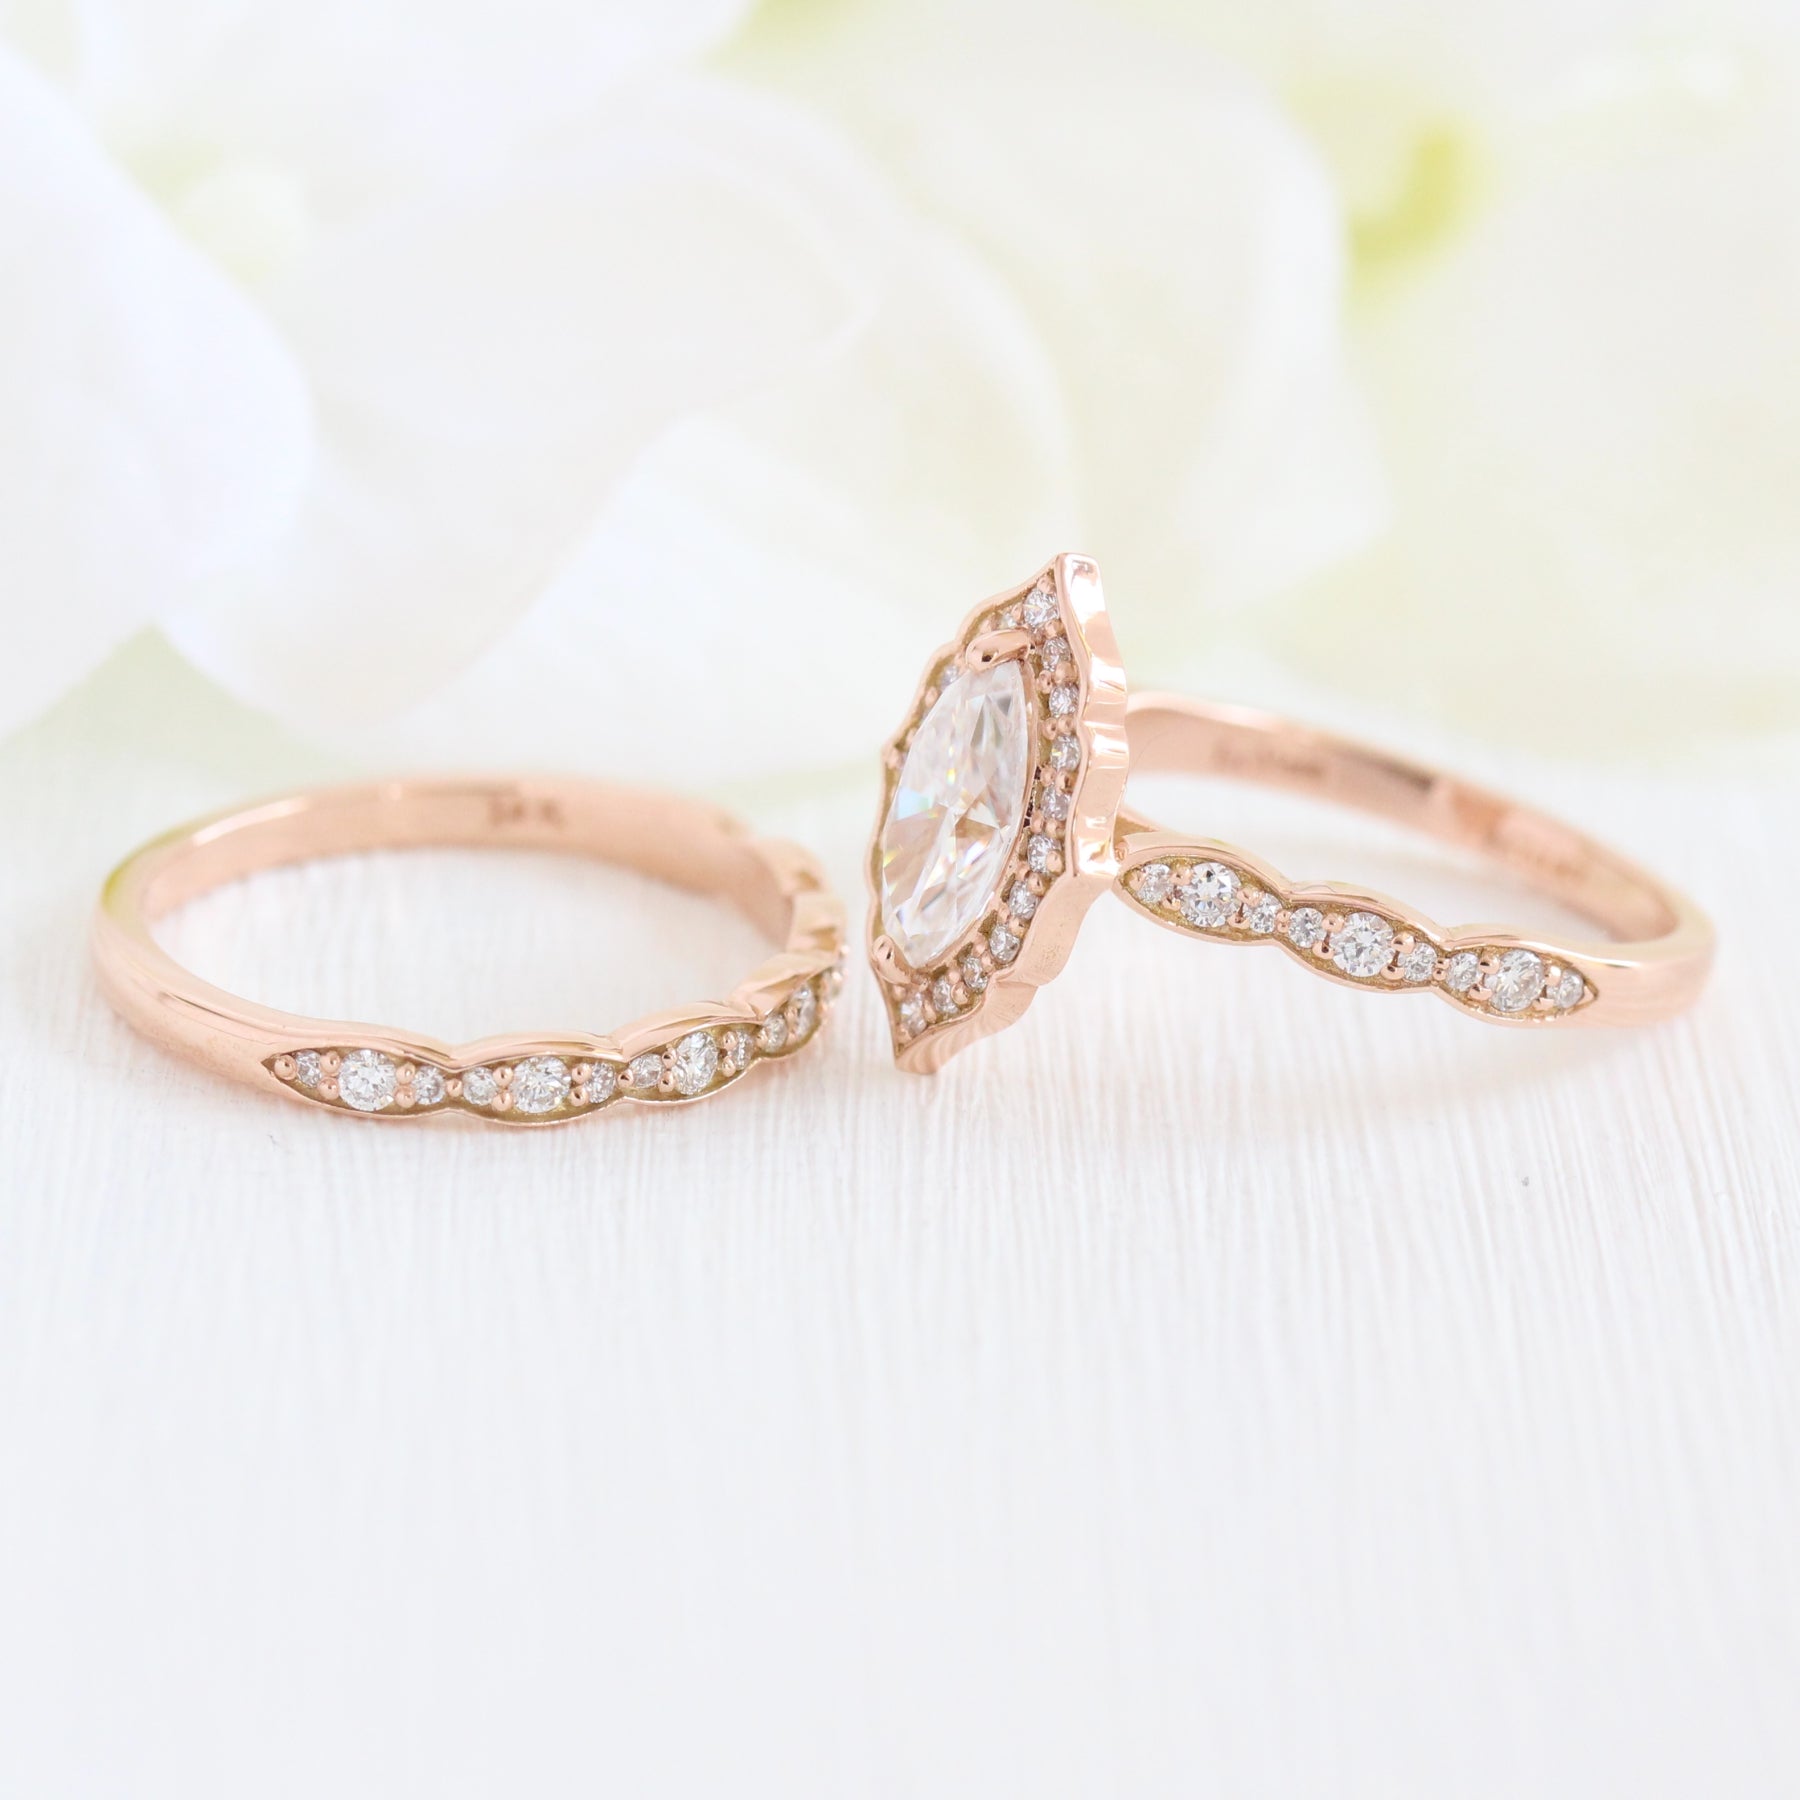 Halo diamond marquise engagement ring rose gold wedding ring bridal set by la more design jewelry